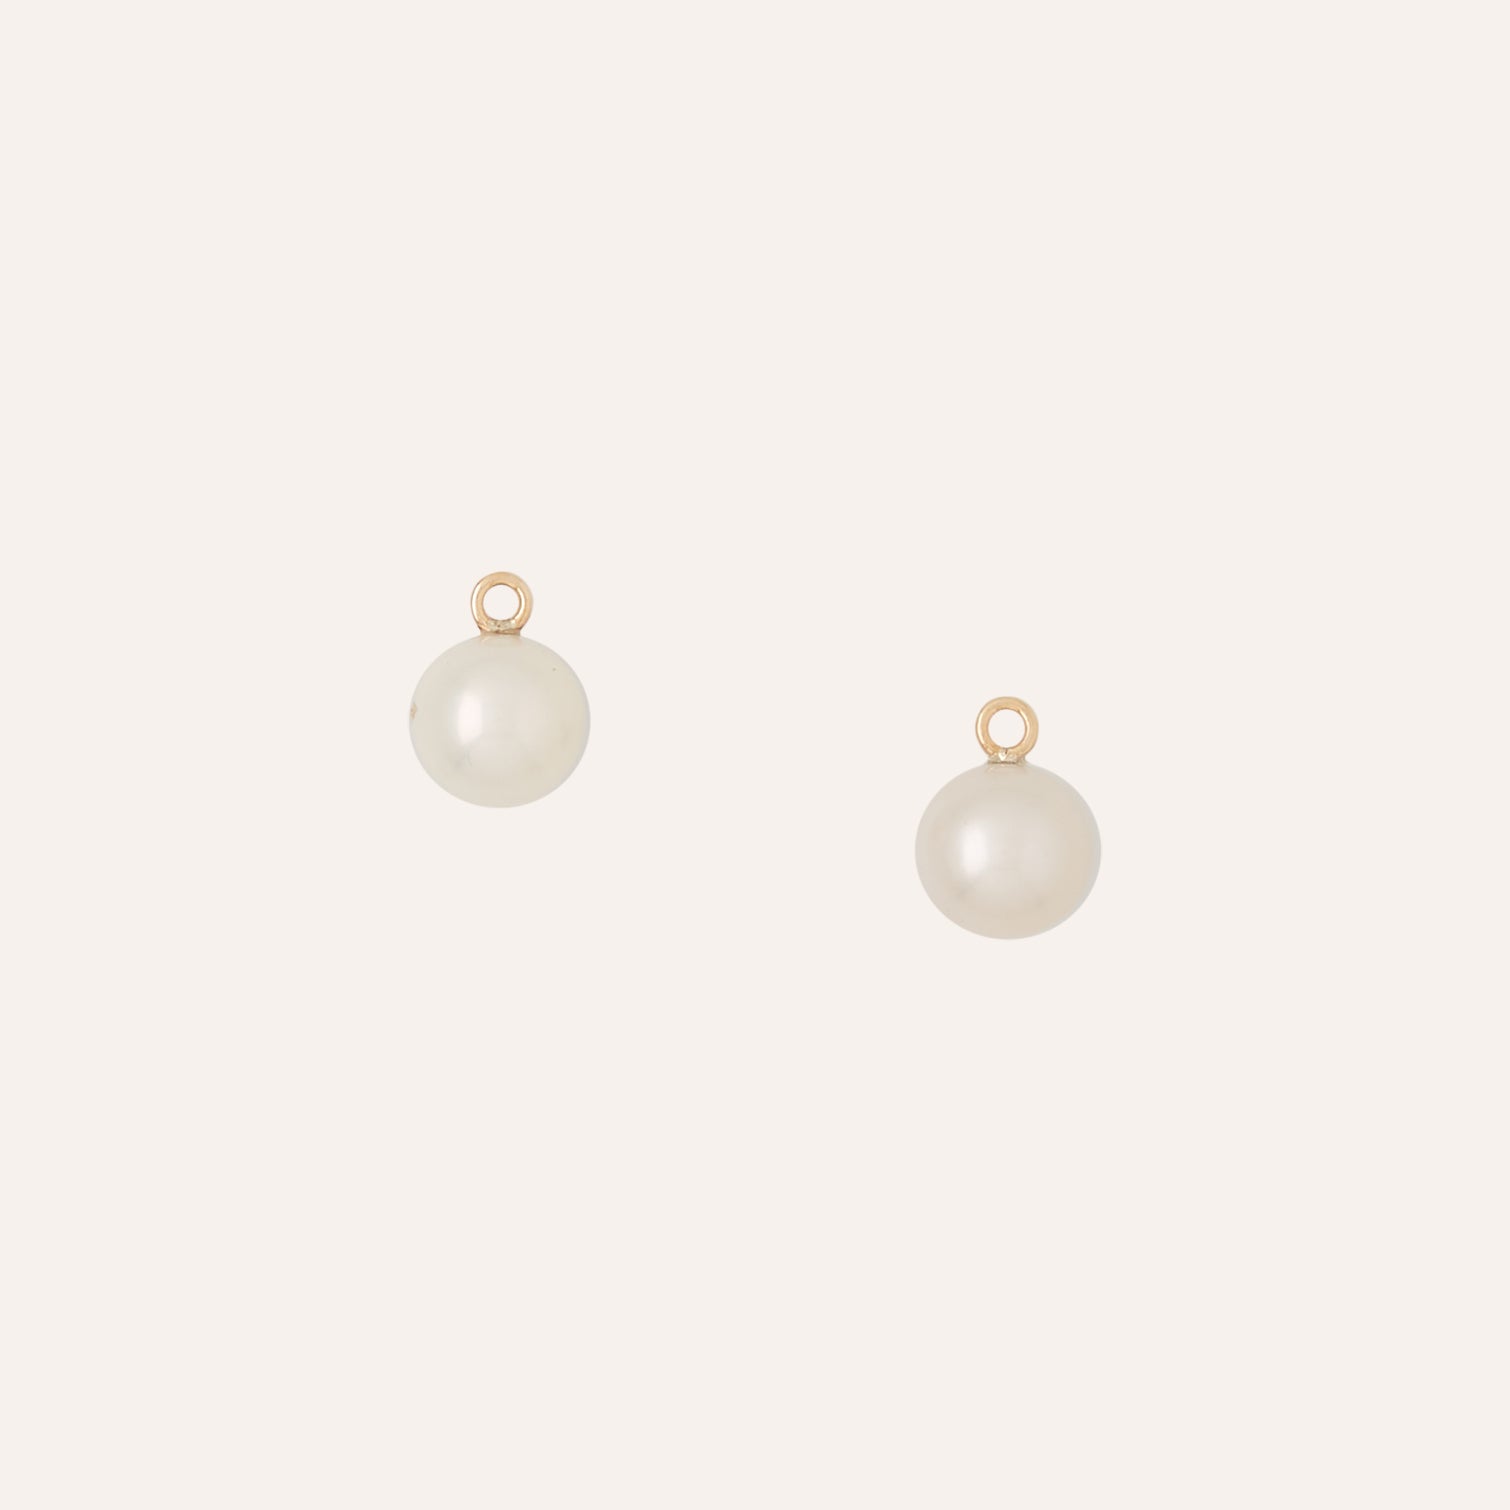 Freshwater White Pearl Round 10mm Earring Drops